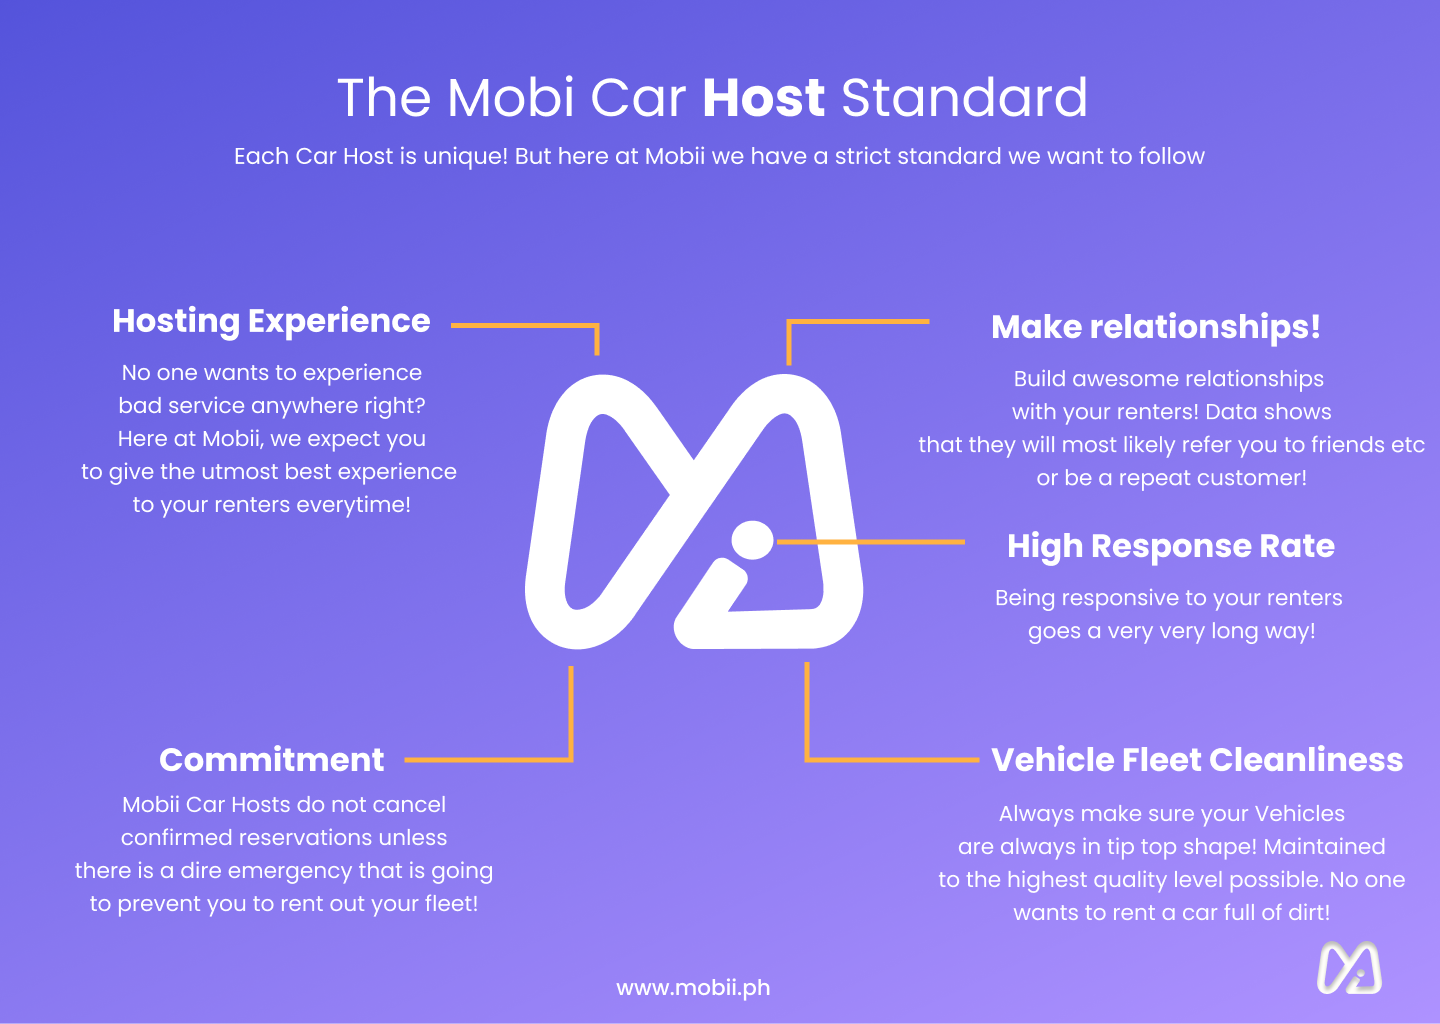 Mobii's standards of hosts